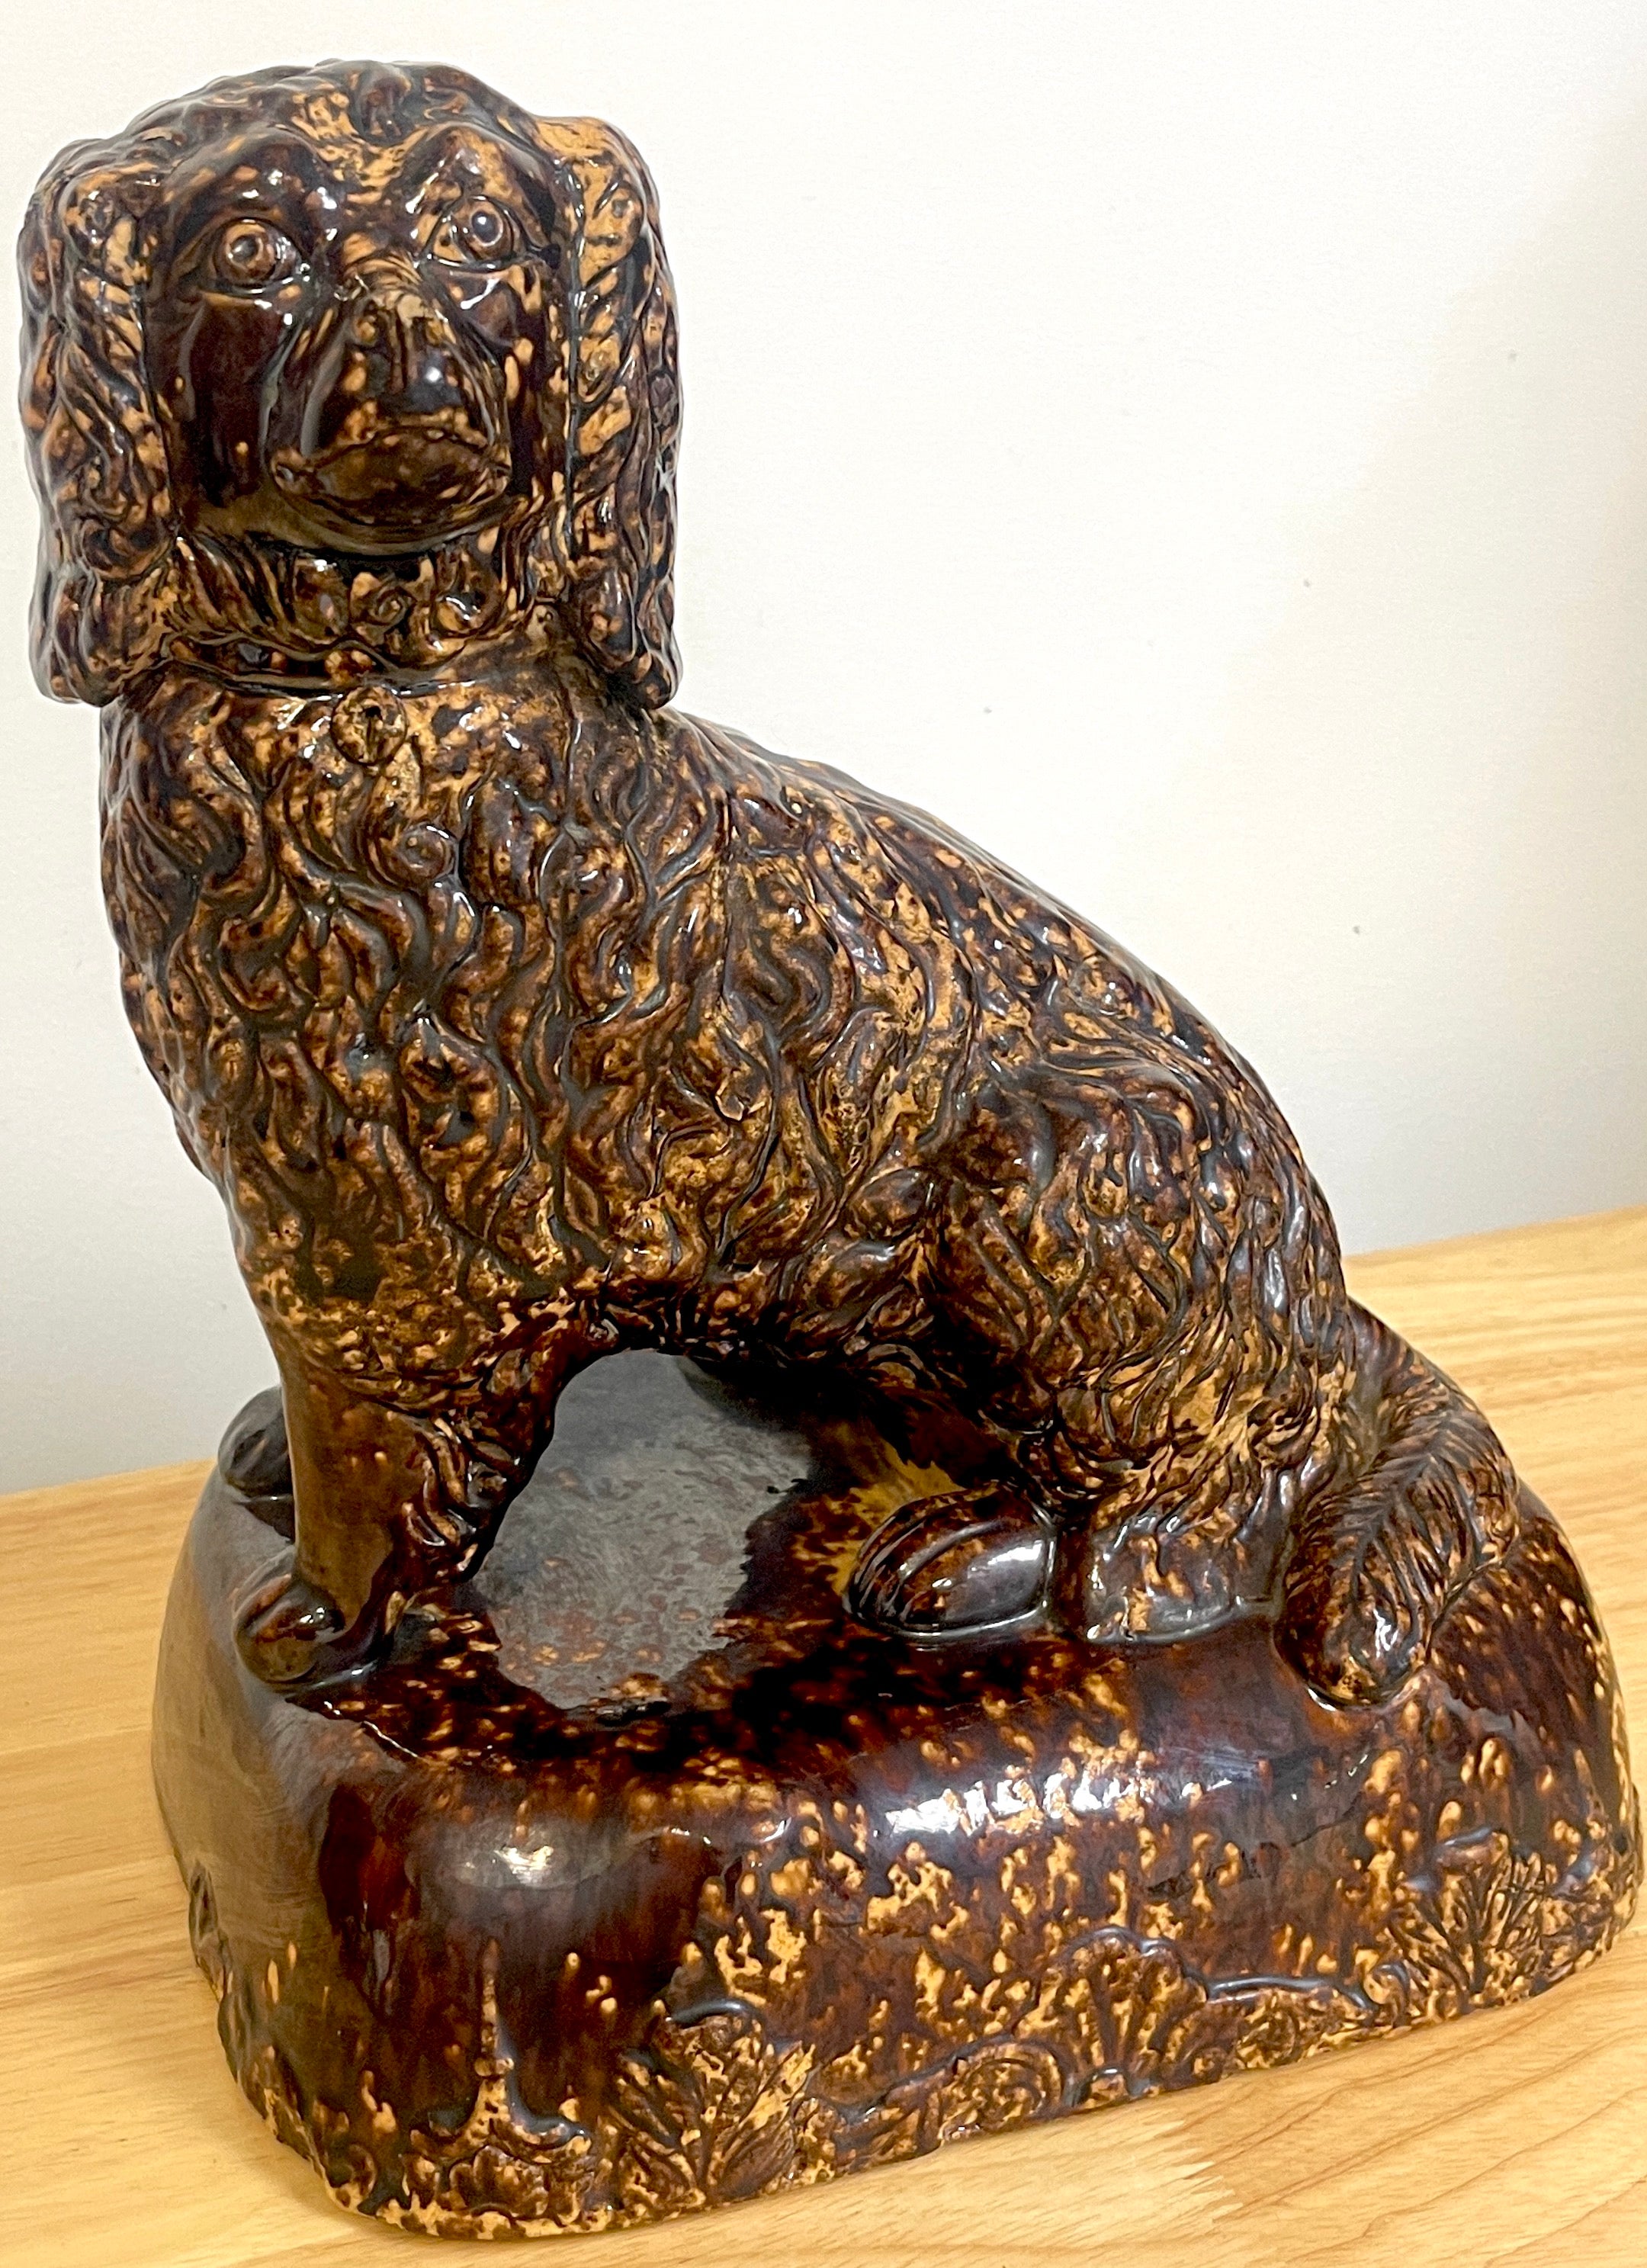 19th Century Bennington pottery seated spaniel with treacle glaze, circa 1860s.
From the Bennington factory in Vermont USA.
A text book example, in well cared for antique condition.
No repairs or damage observed. Unmarked.